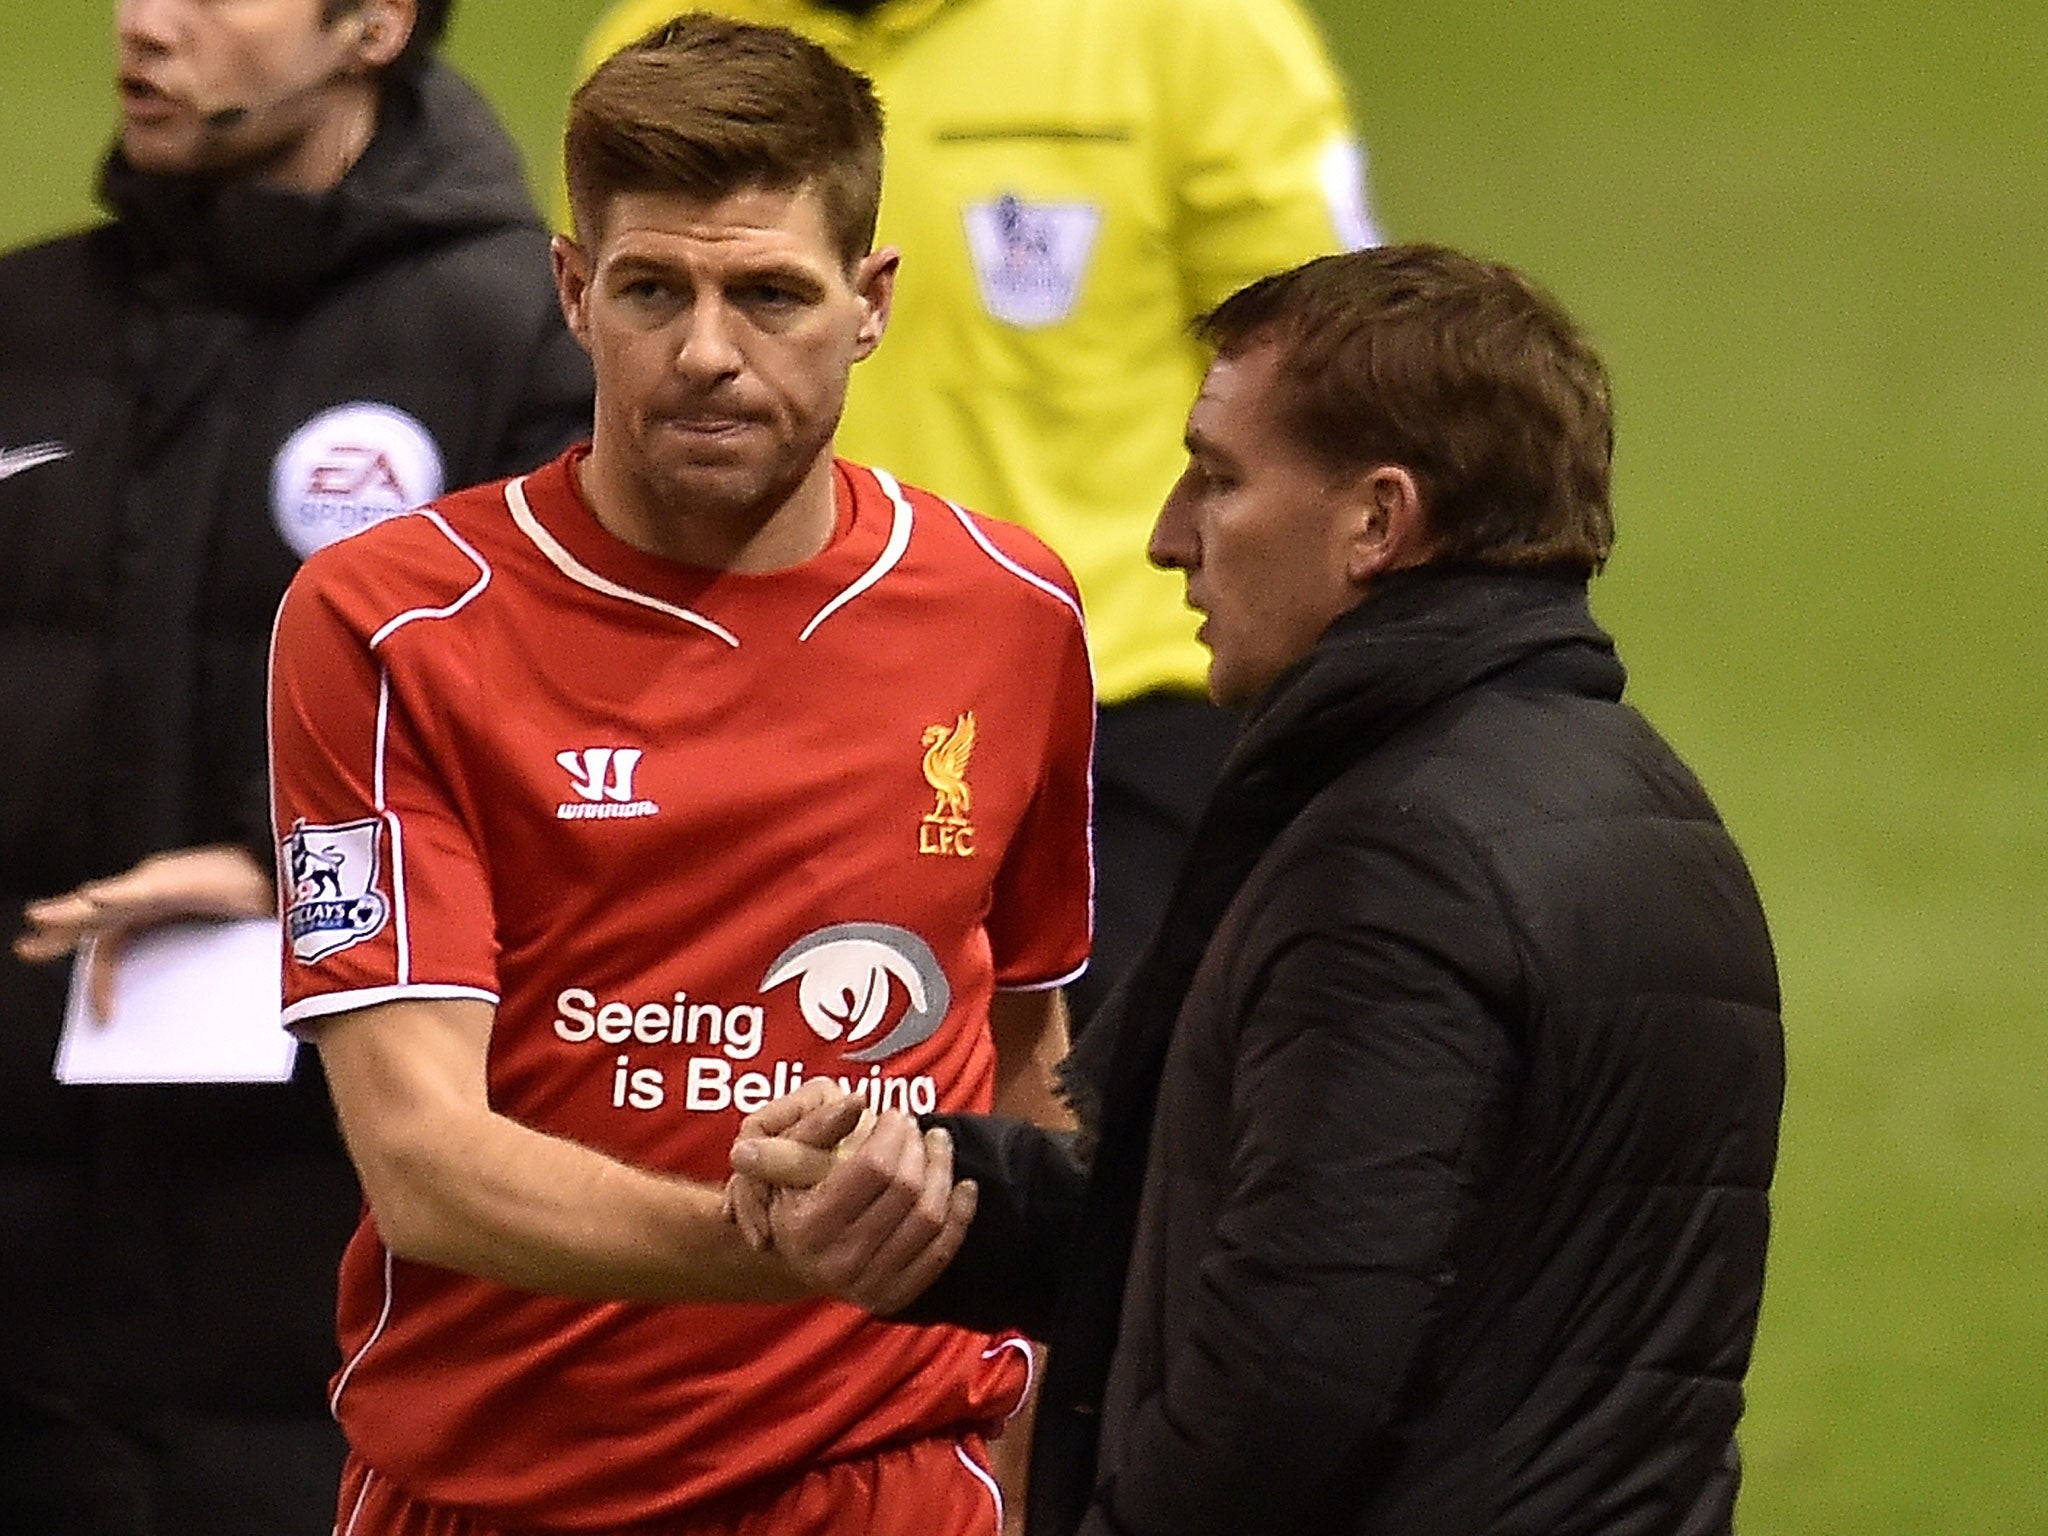 Steven Gerrard was forced off during the 3-2 win over Spurs after suffering a hamstring injury